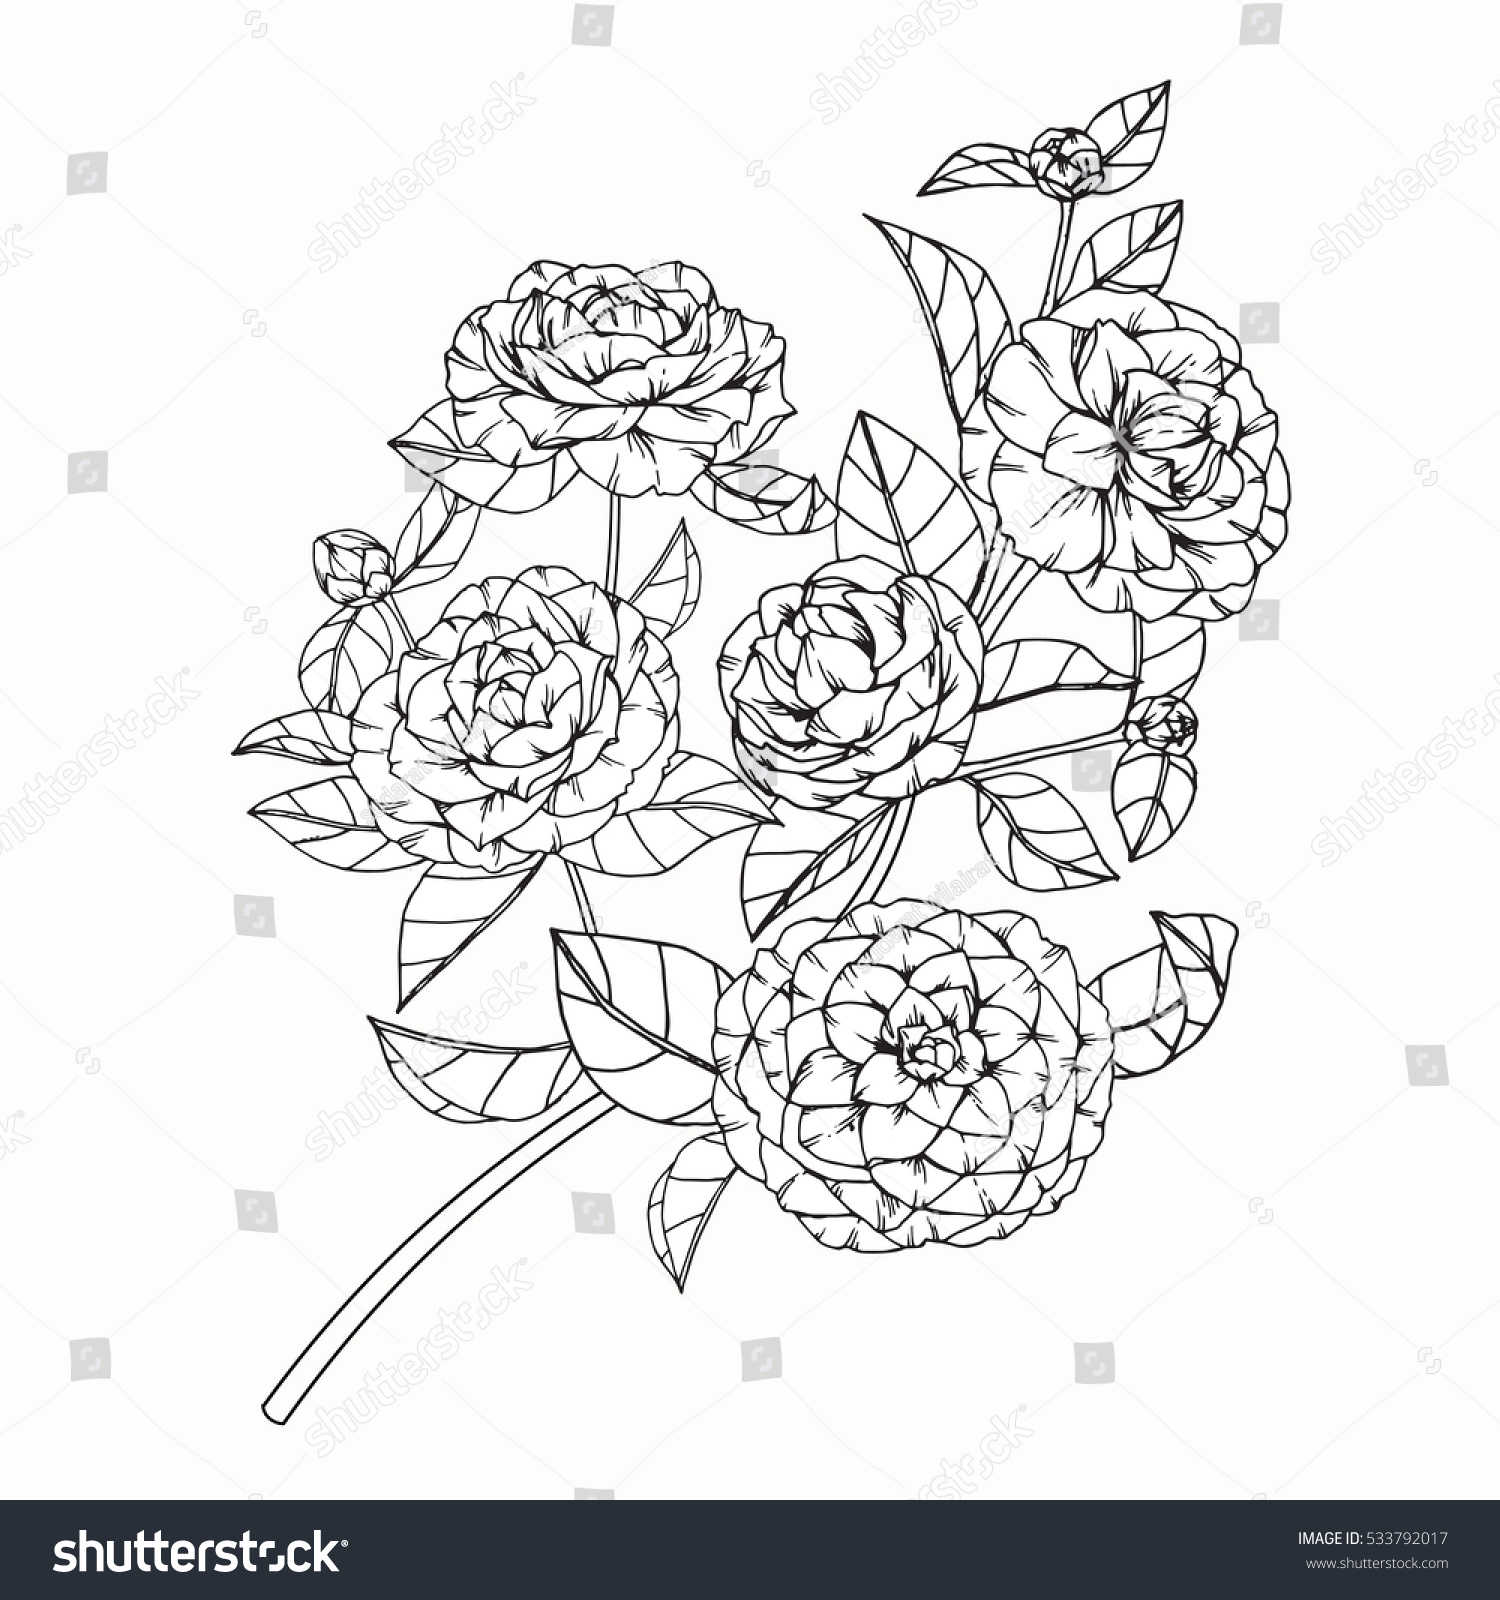 Collection Set Camellia Flower By Hand Stock Vector 533792017